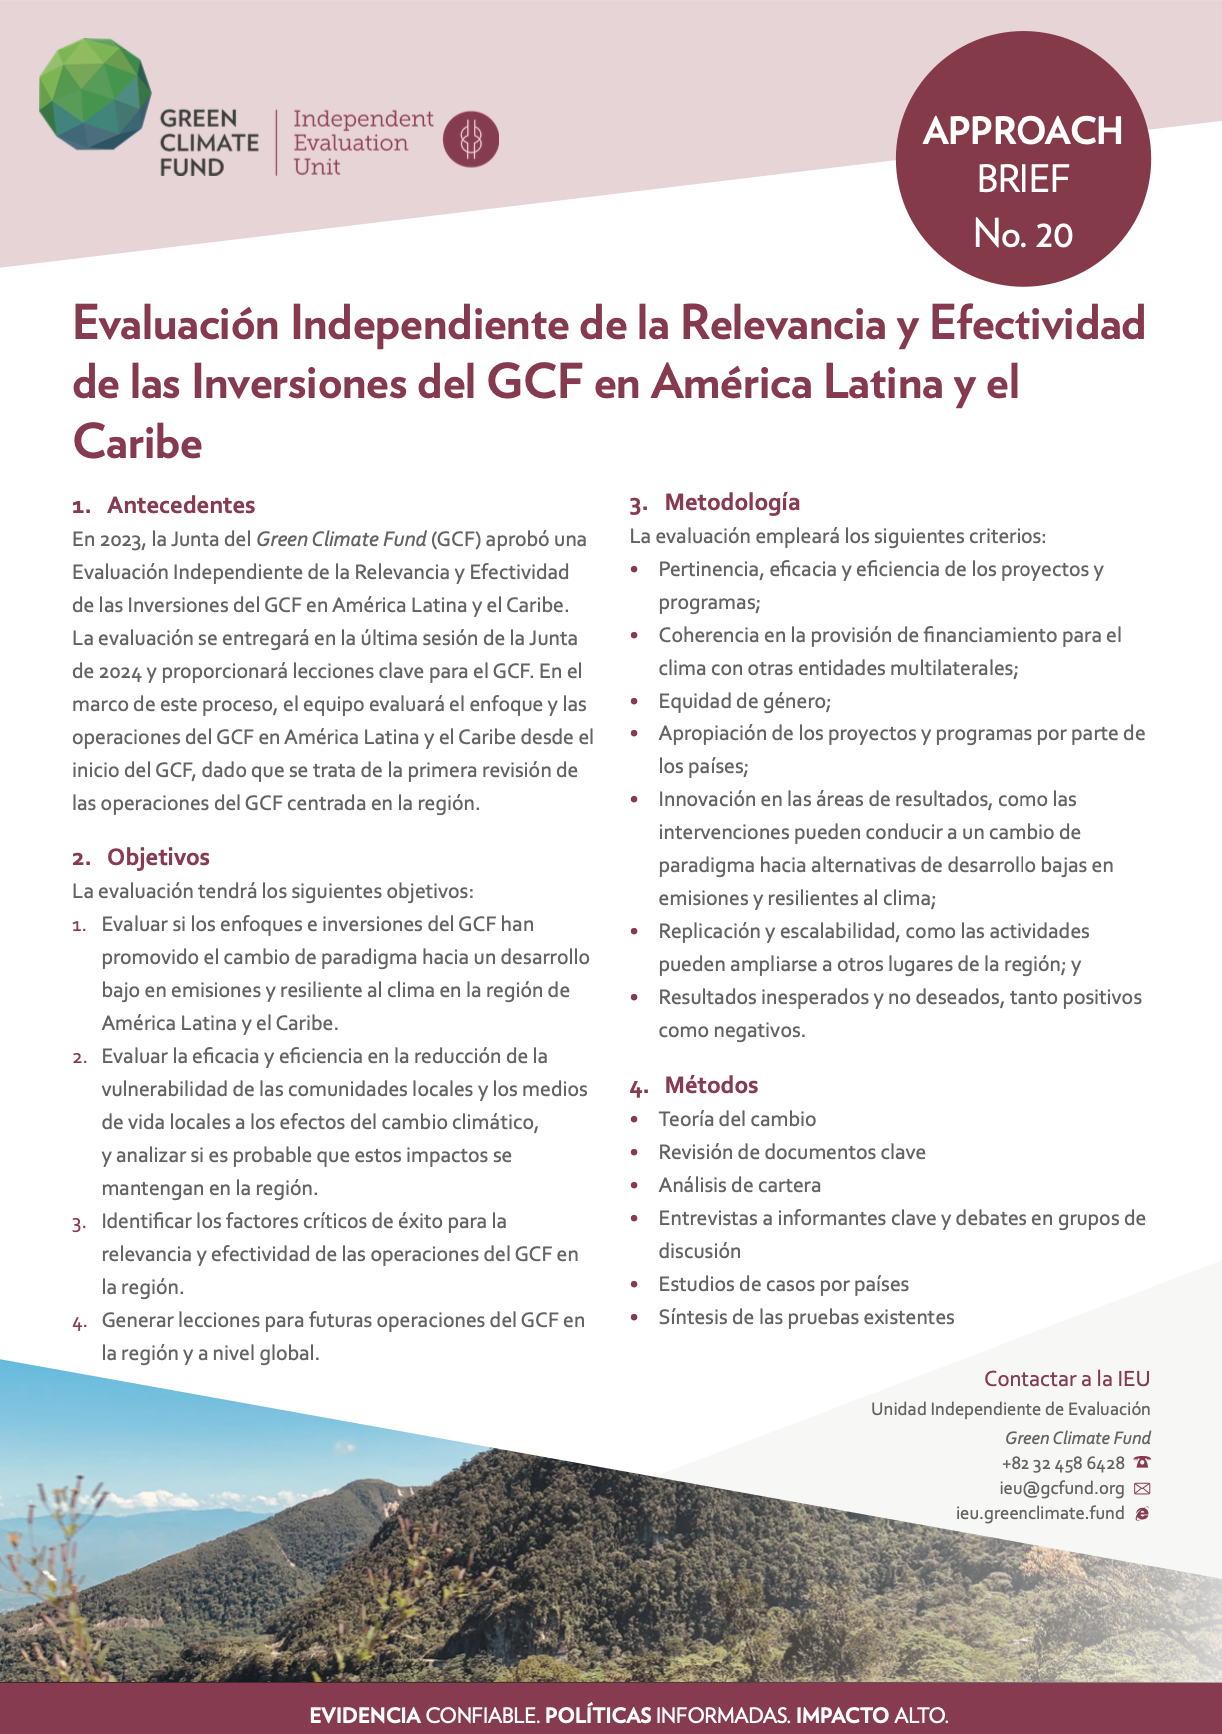 Document cover for Approach Brief: Independent Evaluation of the Relevance and Effectiveness of GCF Investments in Latin America and the Caribbean States